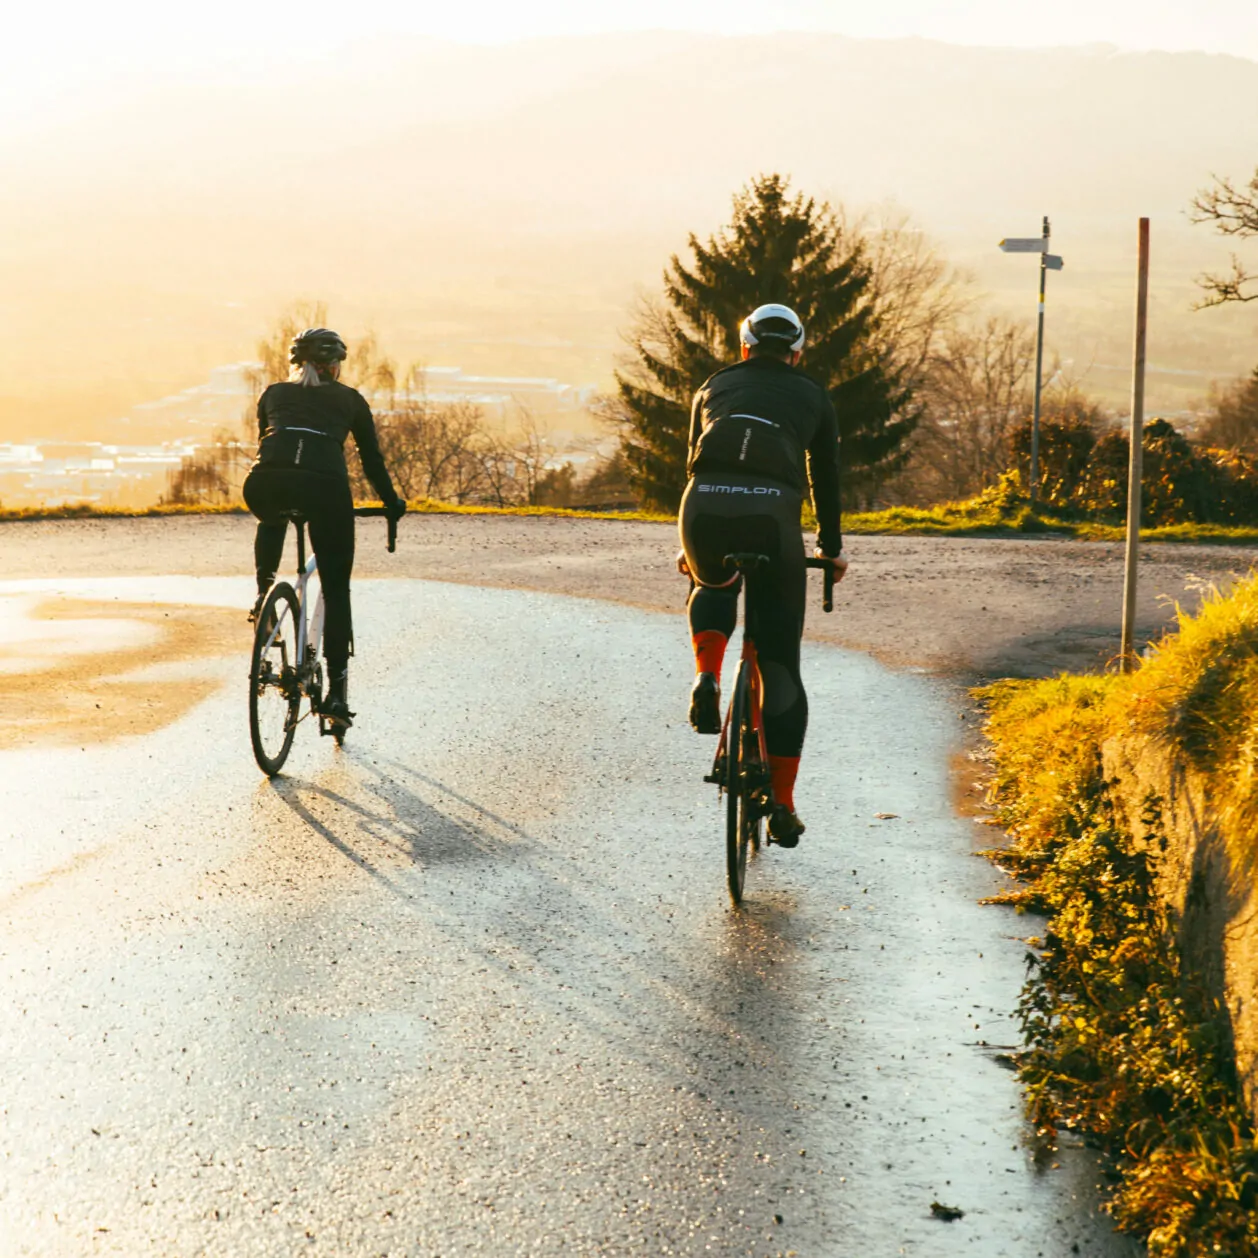 Photo of two cyclists from behind riding on a wet road.